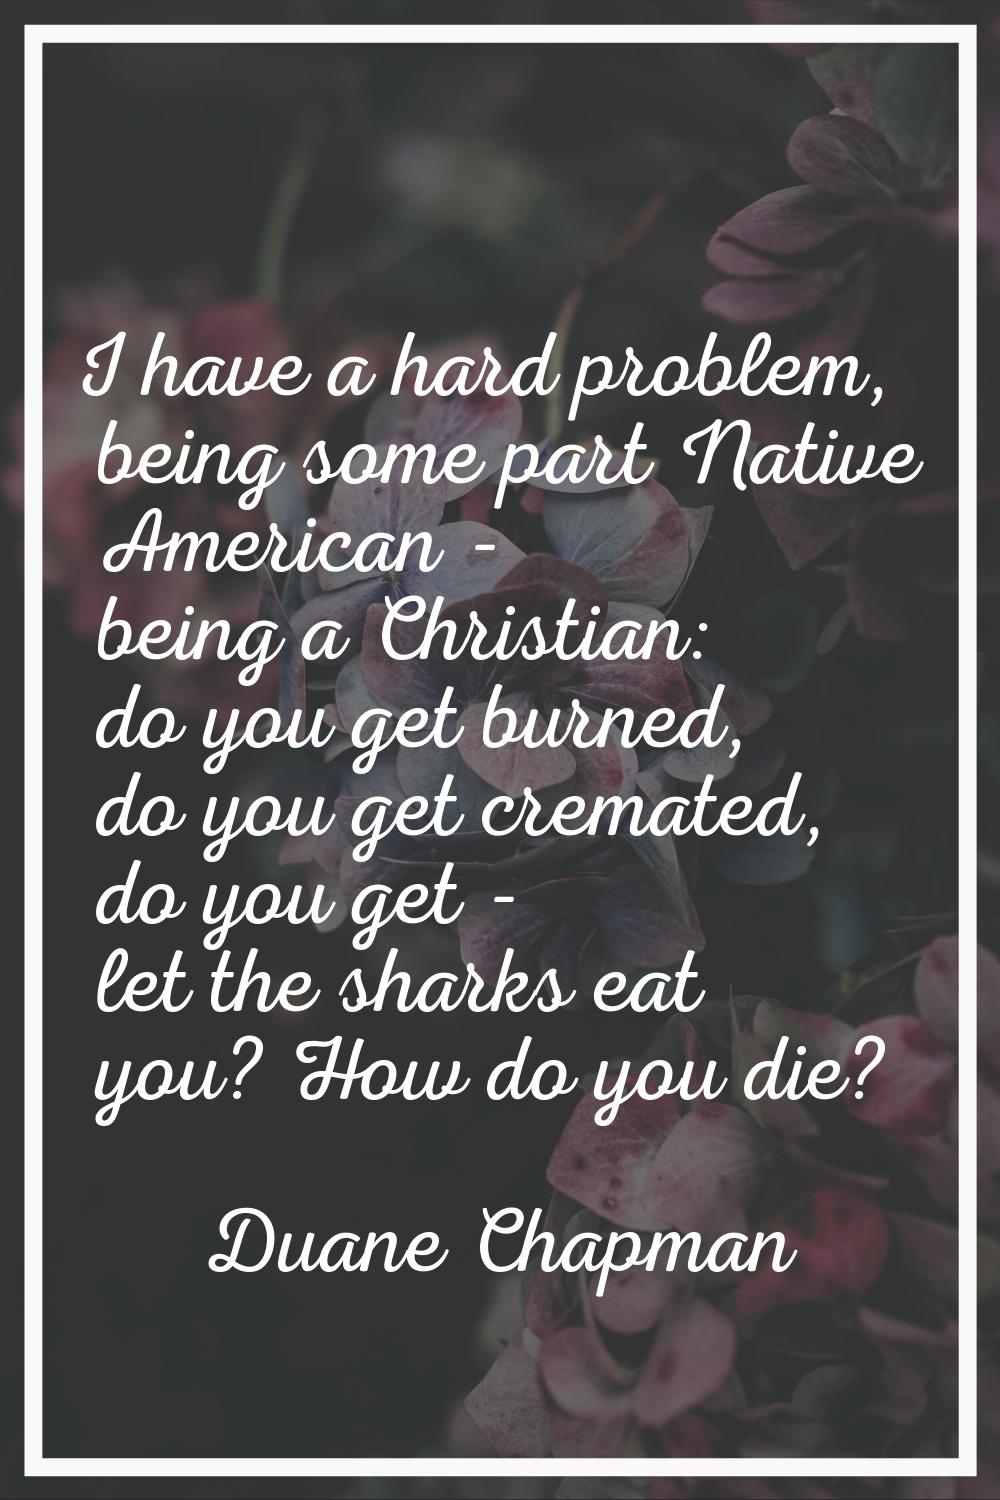 I have a hard problem, being some part Native American - being a Christian: do you get burned, do y